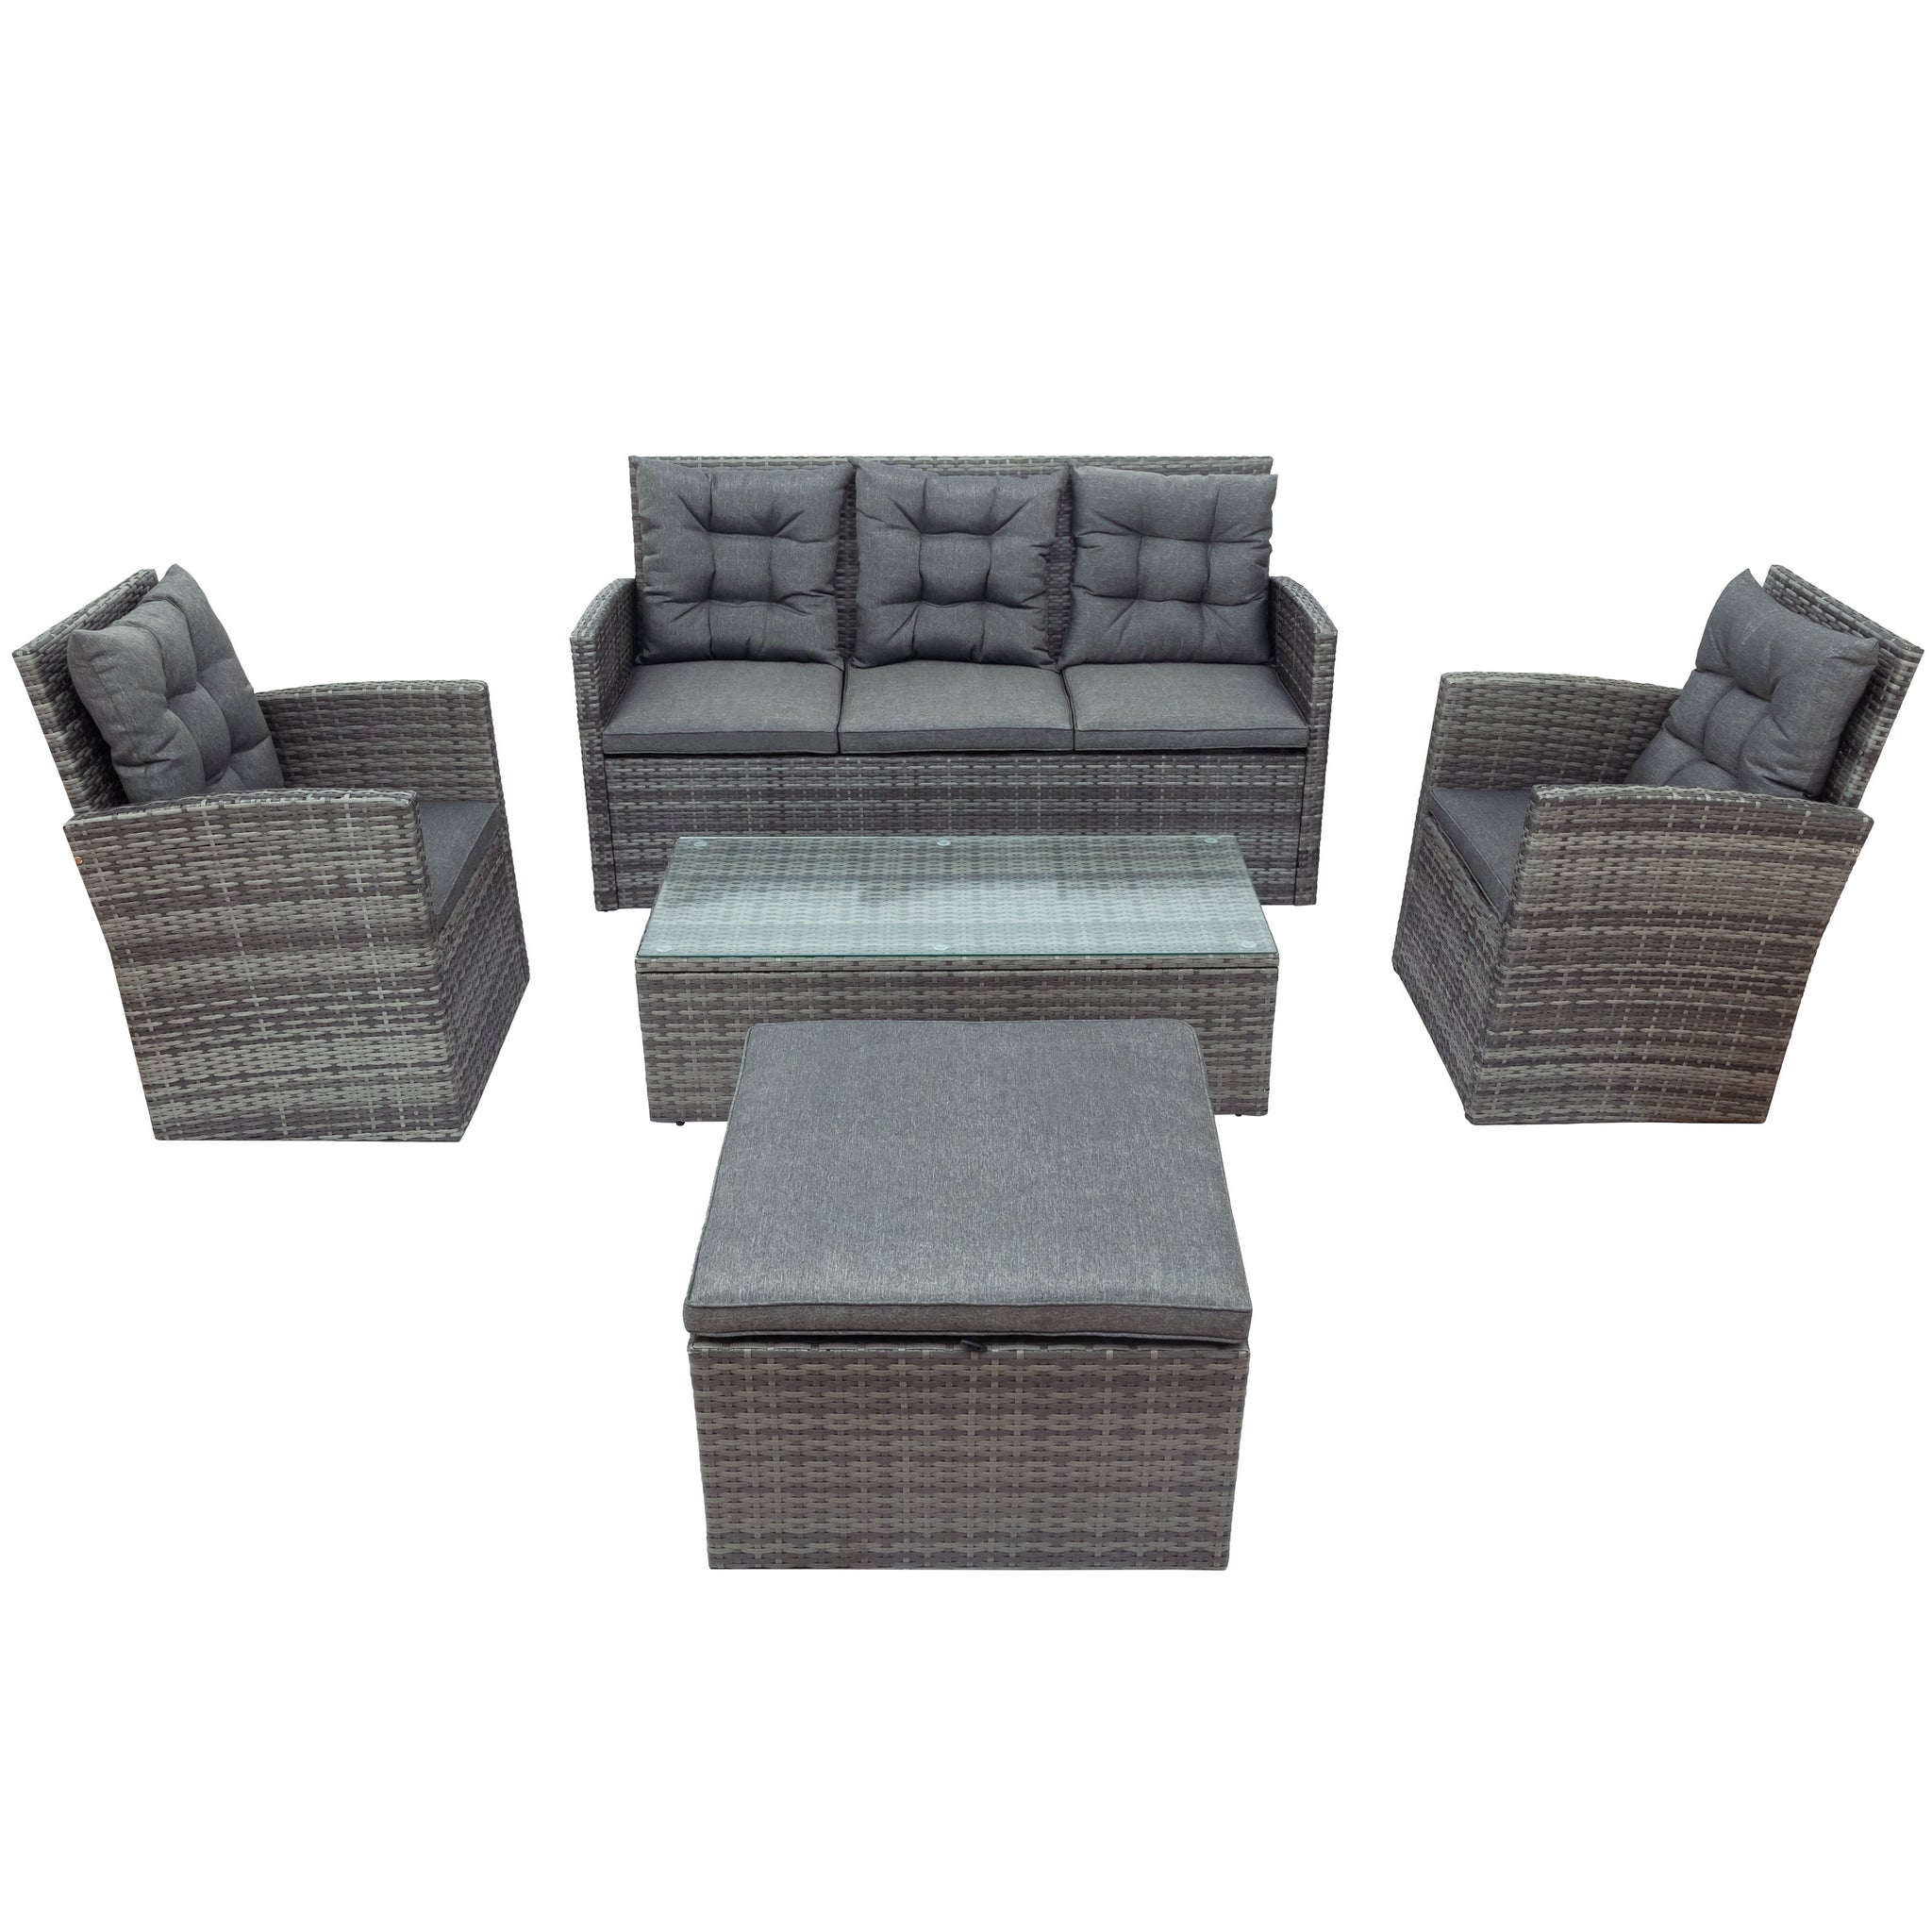 5-piece Patio Sofa Set with Storage Bench PE Wicker Furniture Coversation Set with Table, Gray